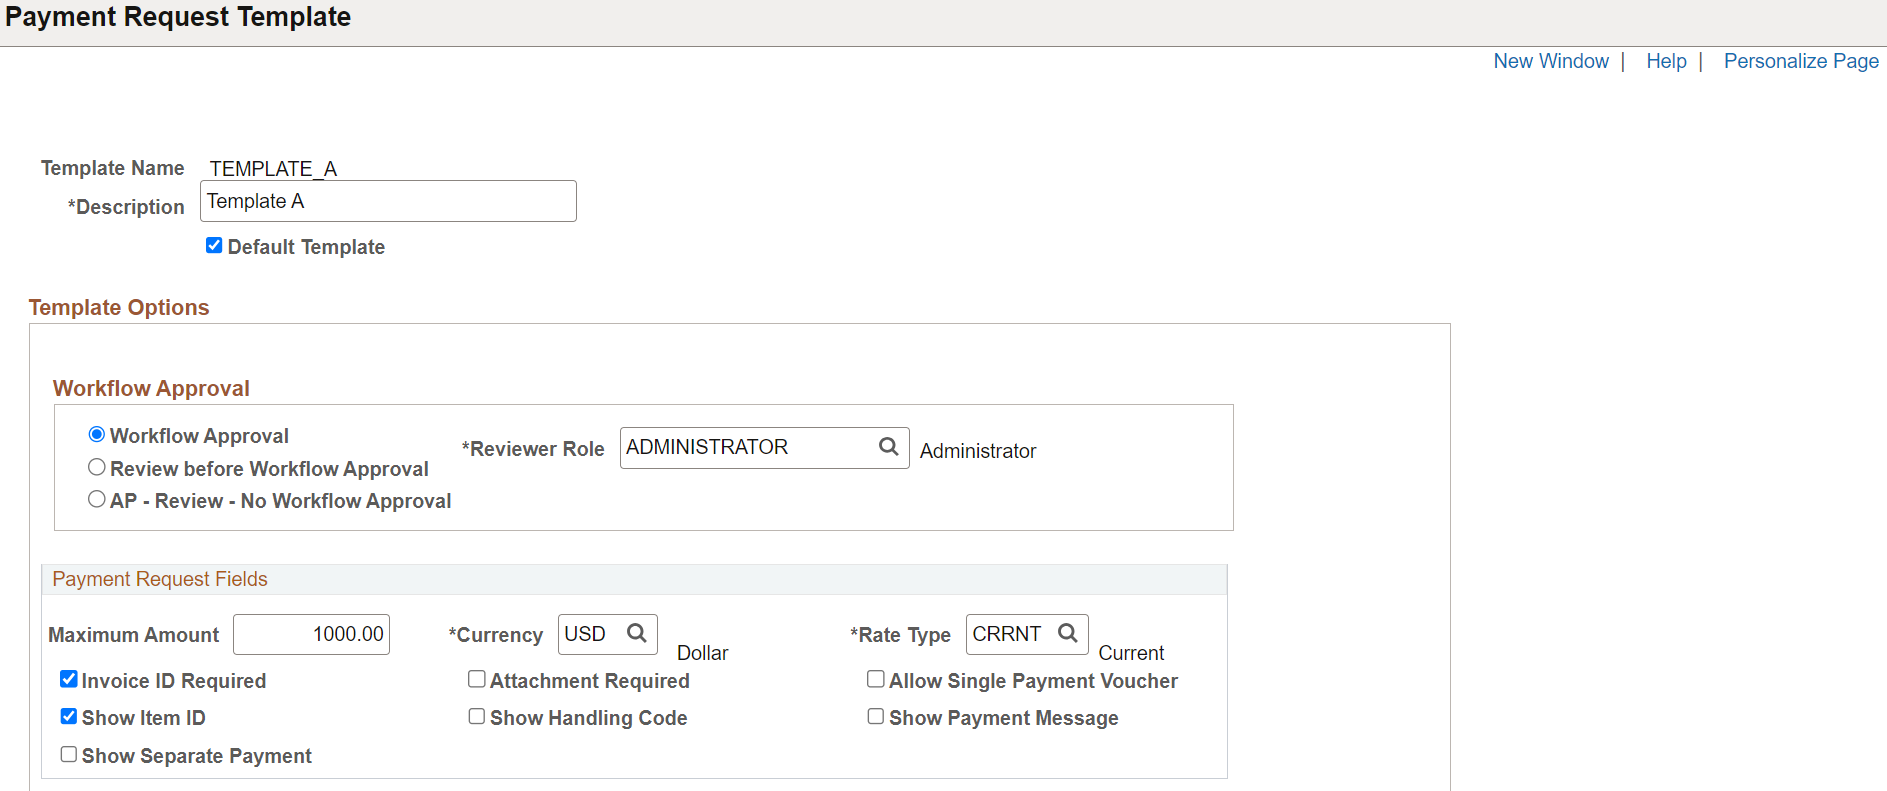 Payment Request Template (1 of 4)